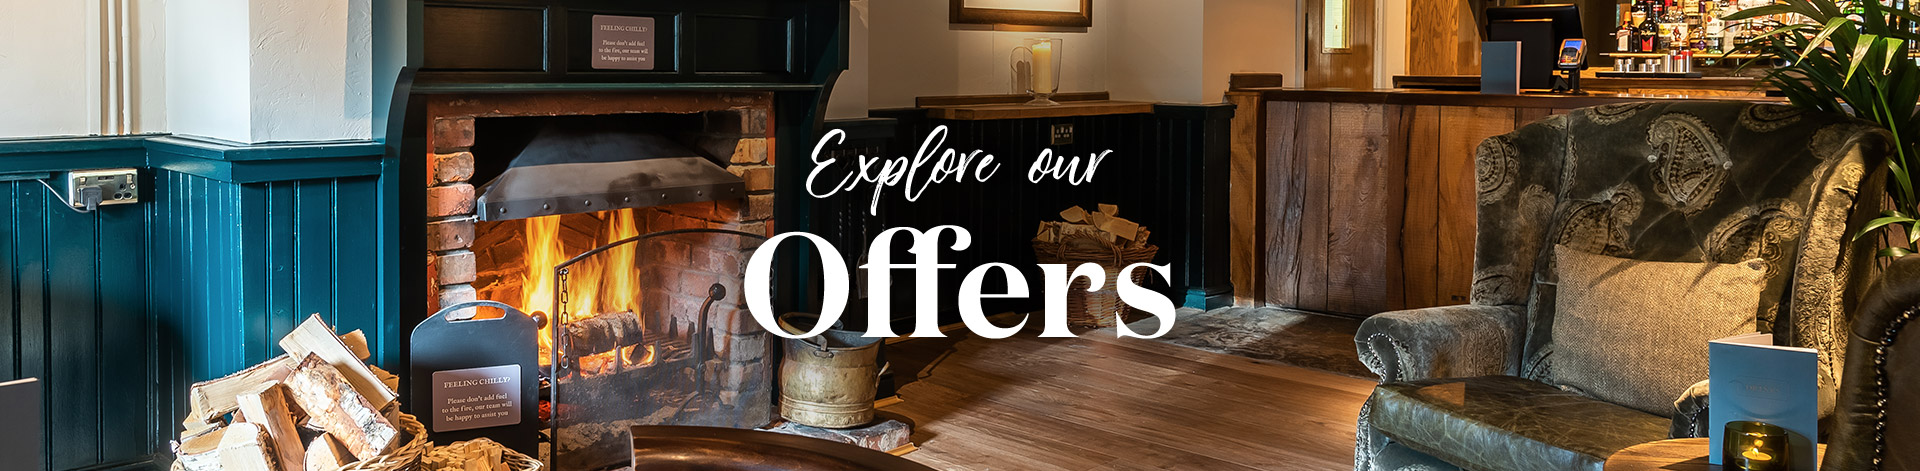 Our latest offers at The Dormouse